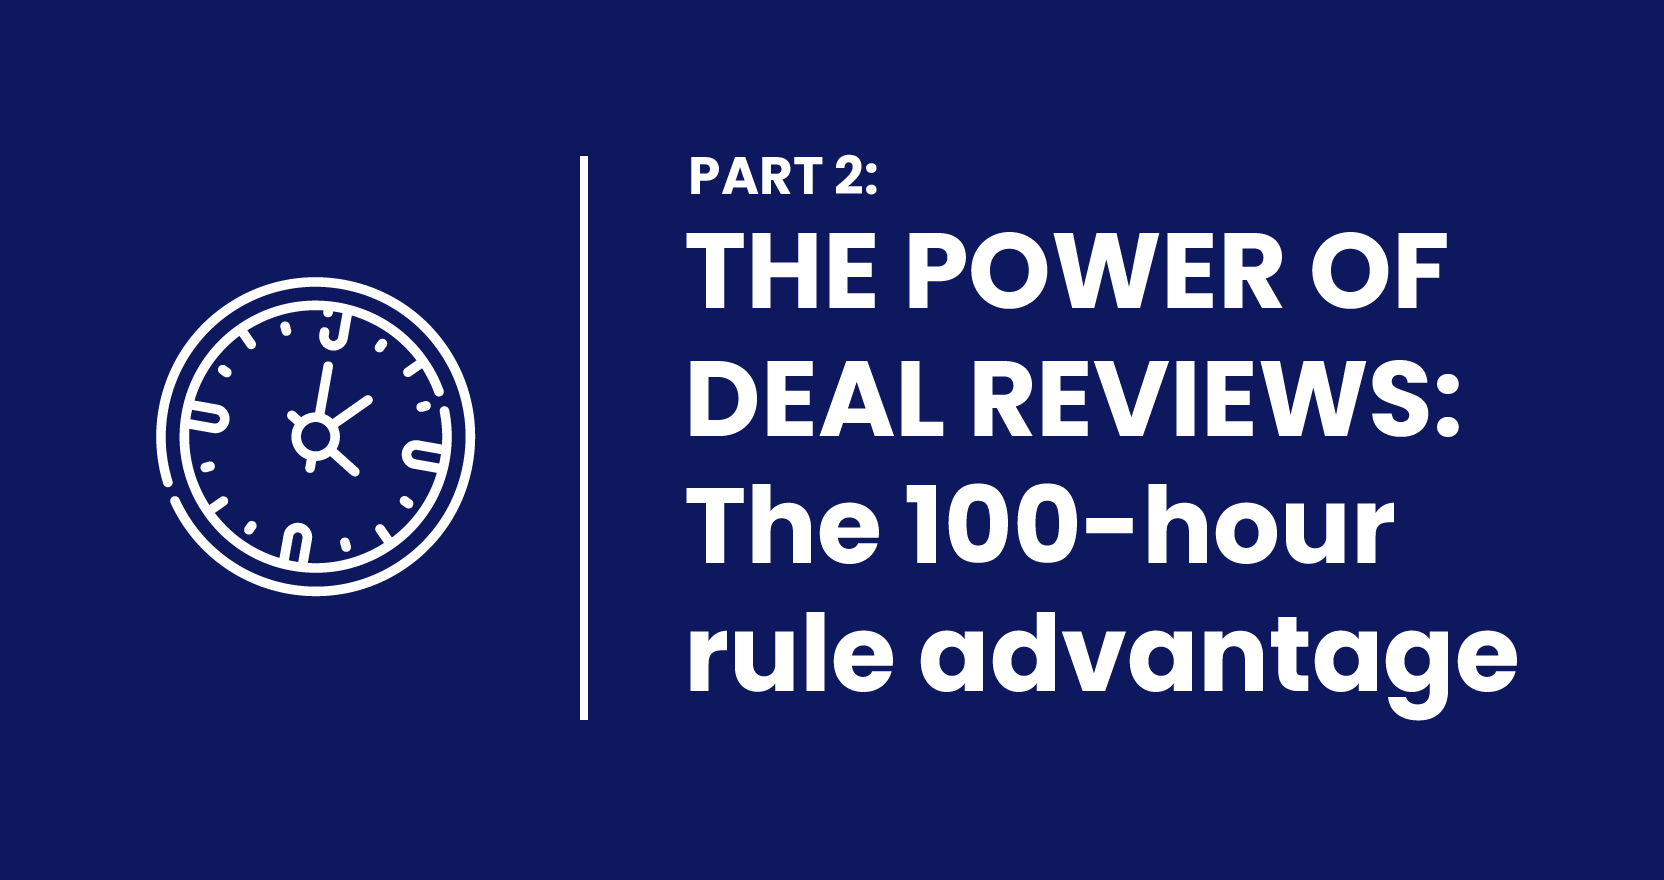 THE POWER OF DEAL REVIEWS: THE 100-HOUR RULE ADVANTAGE